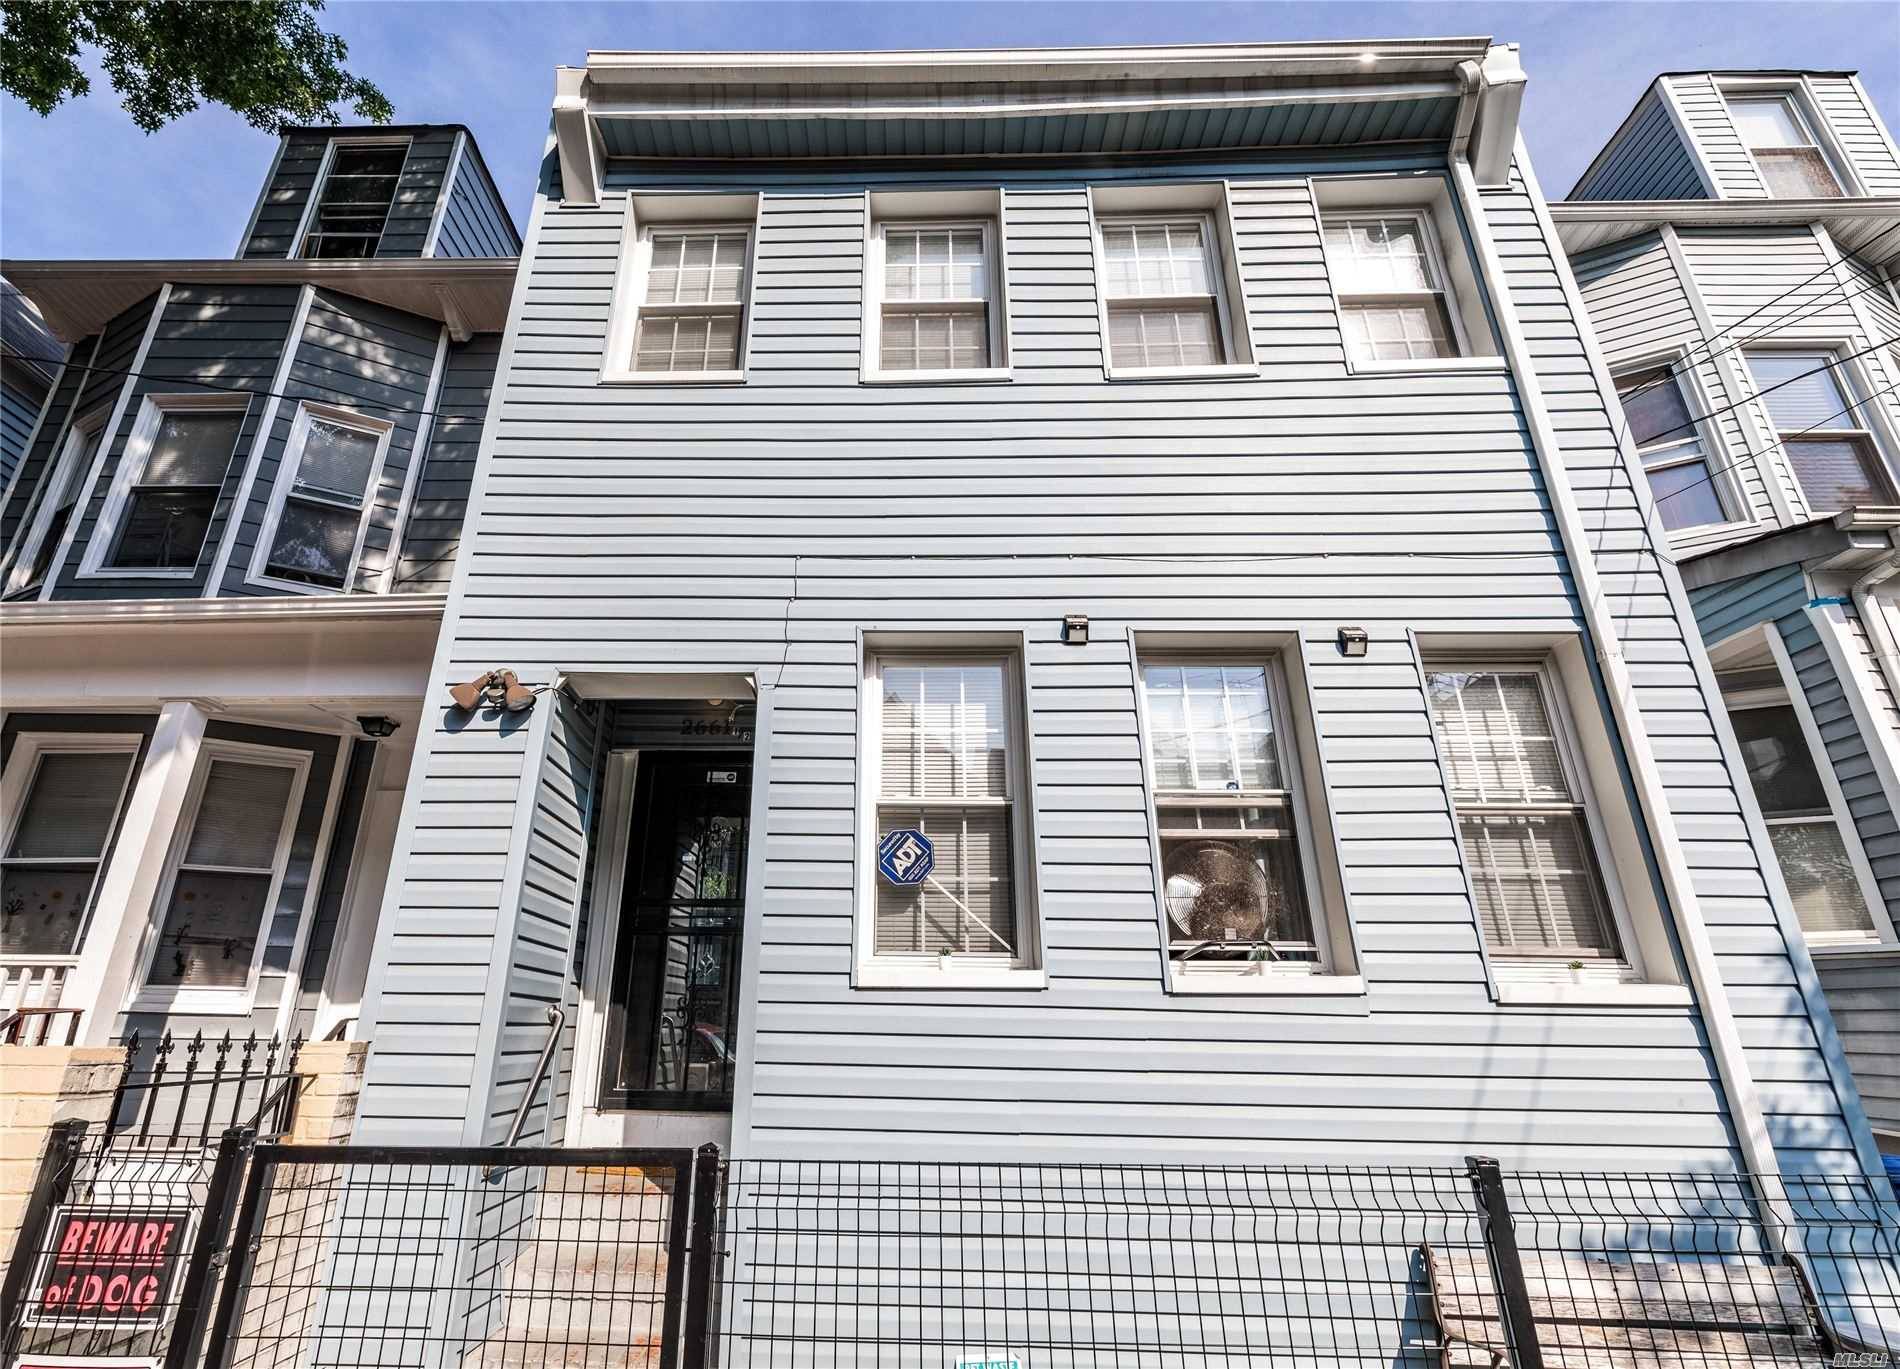 Immaculately kept 2 family home with finished basement in the Fordham section of the Bronx.